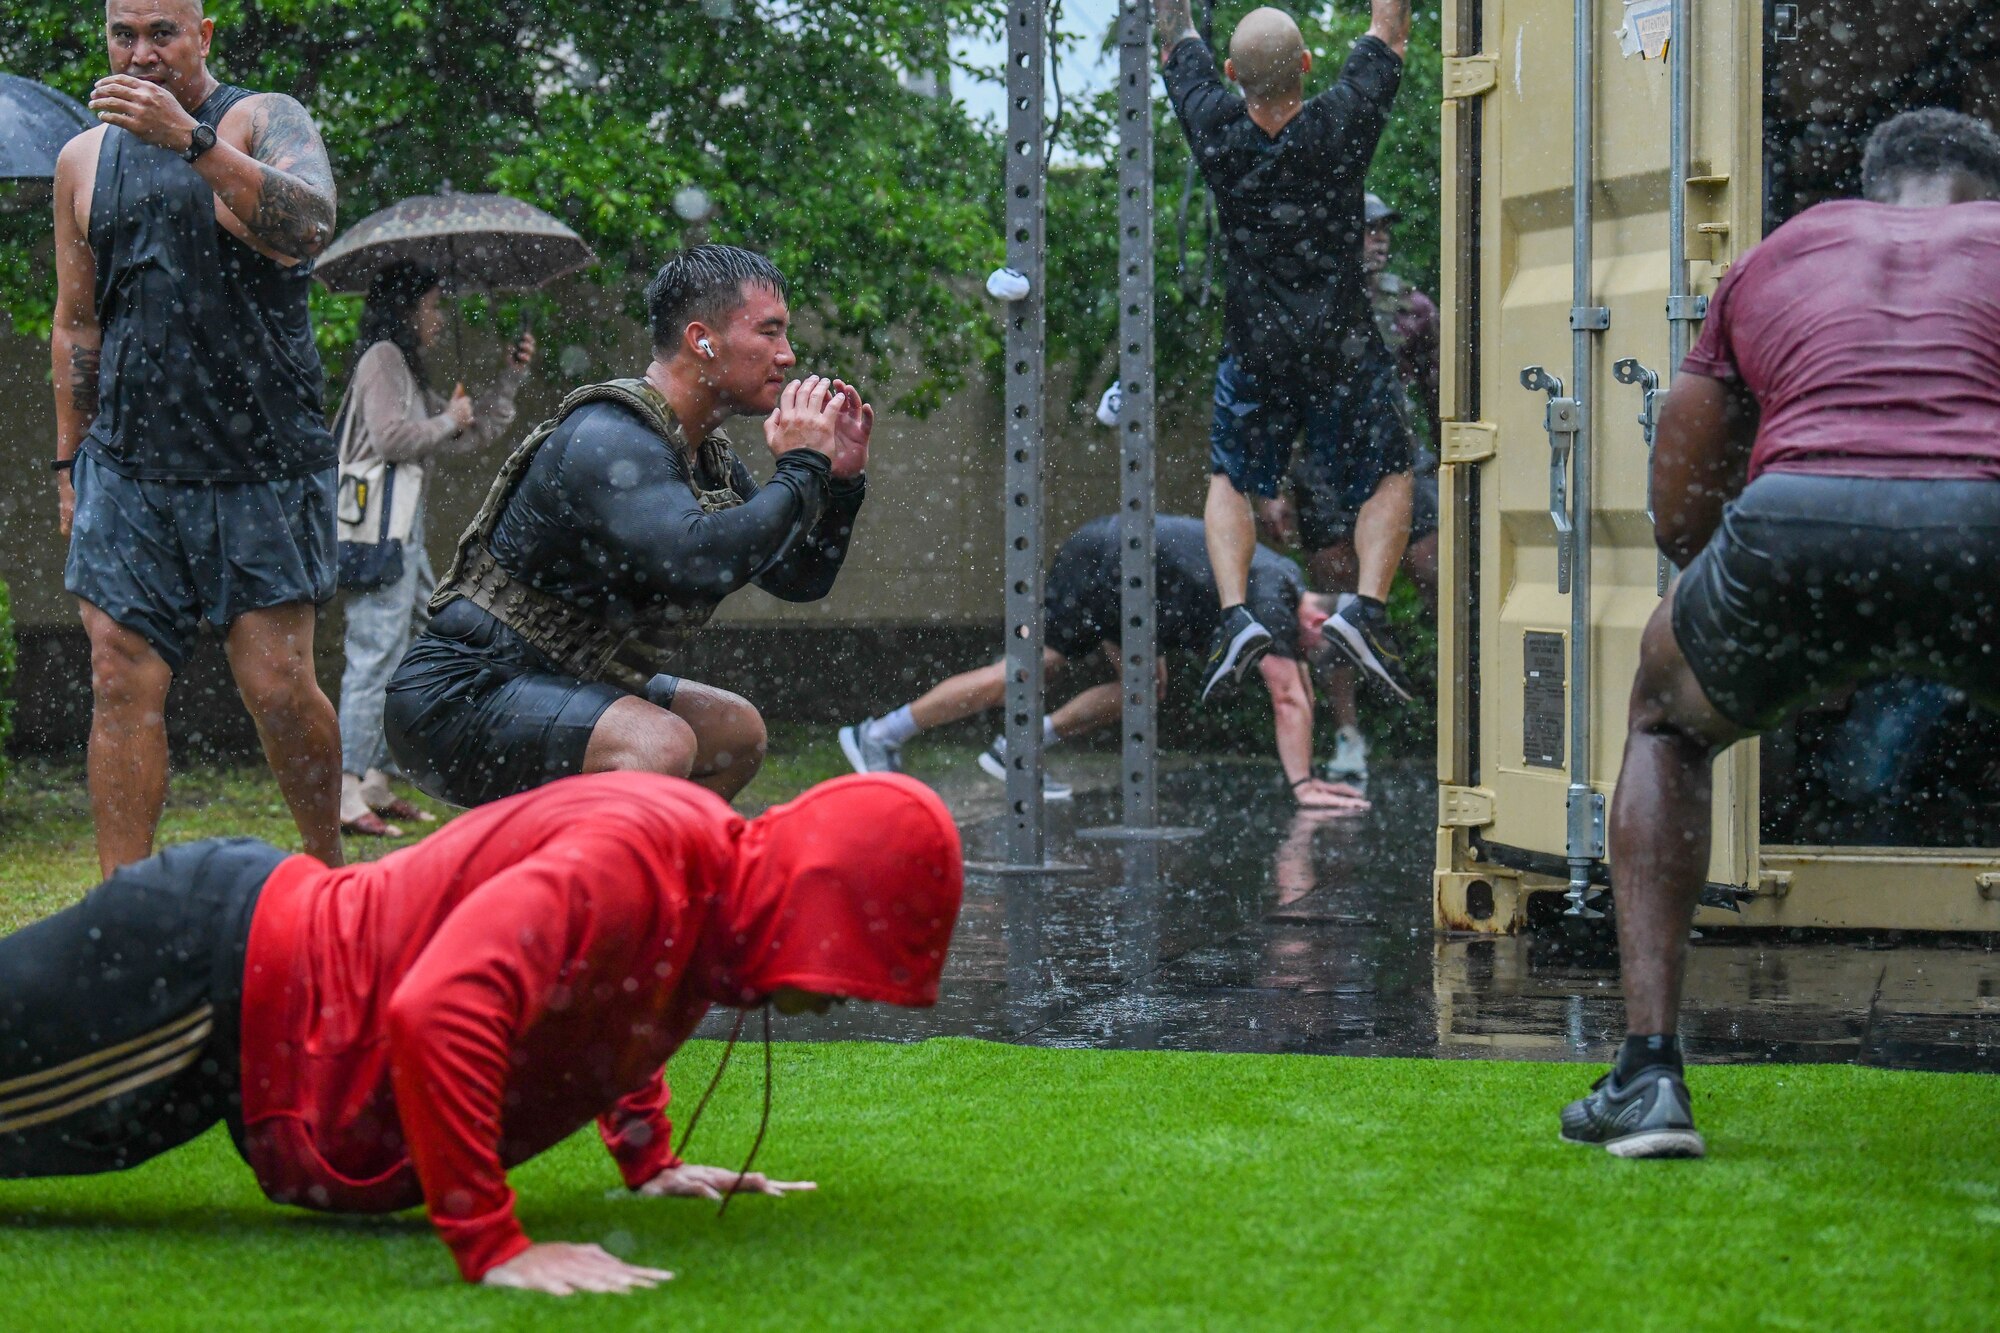 Fitness enthusiasts perform squats, pull-ups and push-ups during a Murph challenge at Yokota Air Base, Japan, May 27, 2022. The Murph challenge coincided with a box gym grand opening at the base natatorium. (U.S. Air Force photo by Staff Sgt. Jessica Avallone)